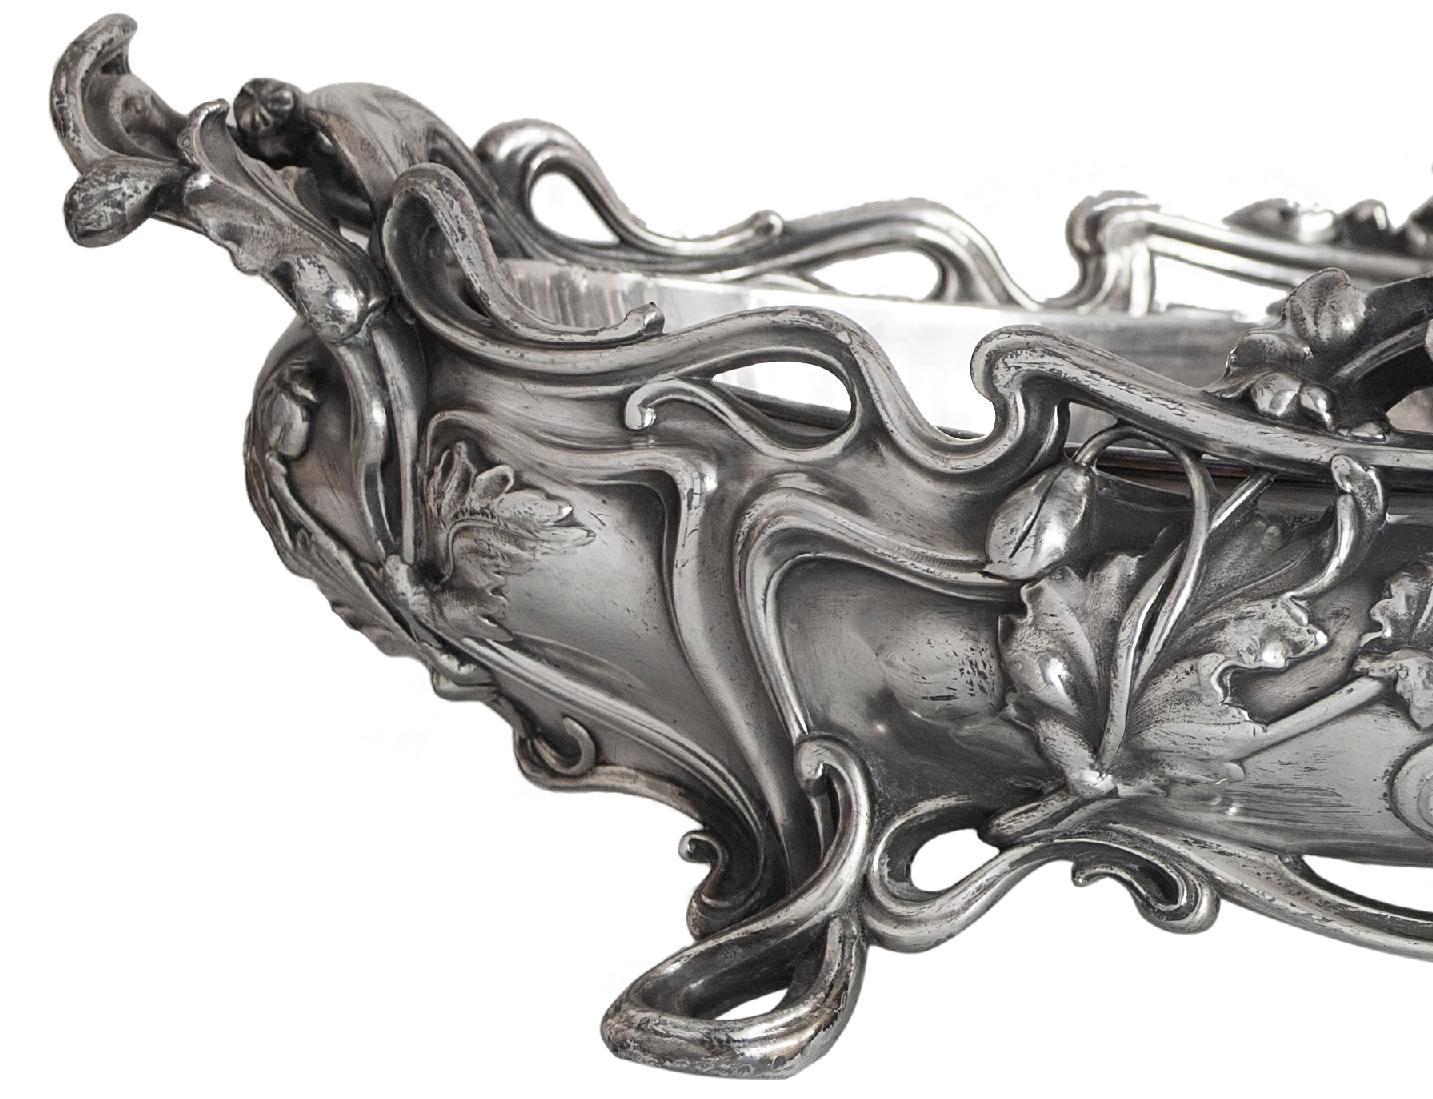 Centerplace

Silverplated
We have specialized in the sale of Art Deco and Art Nouveau and Vintage styles since 1982. If you have any questions we are at your disposal.
Pushing the button that reads 'View All From Seller'. And you can see more